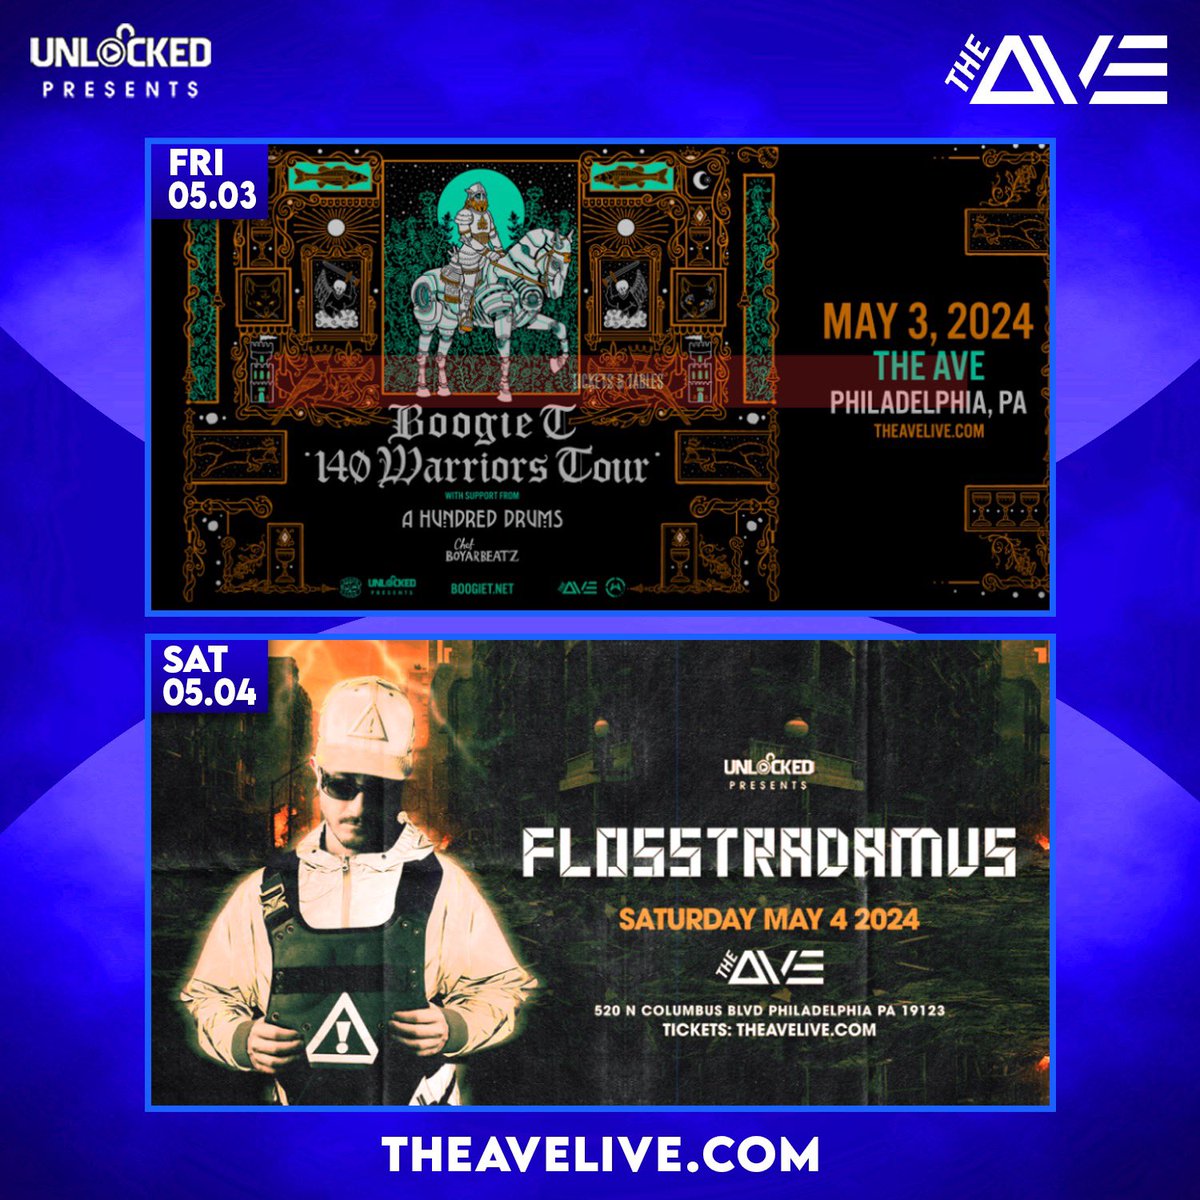 Weekend Lineup ⚠️ This Friday Boogie T is bringing the 140 Warriors Tour to #TheAve with support from A Hundred Drums & Chef Boyarbeatz plus This Saturday Flosstradamus is taking over with support from Redline District, Skii & Hearsay - Tickets at TheAveLive.com